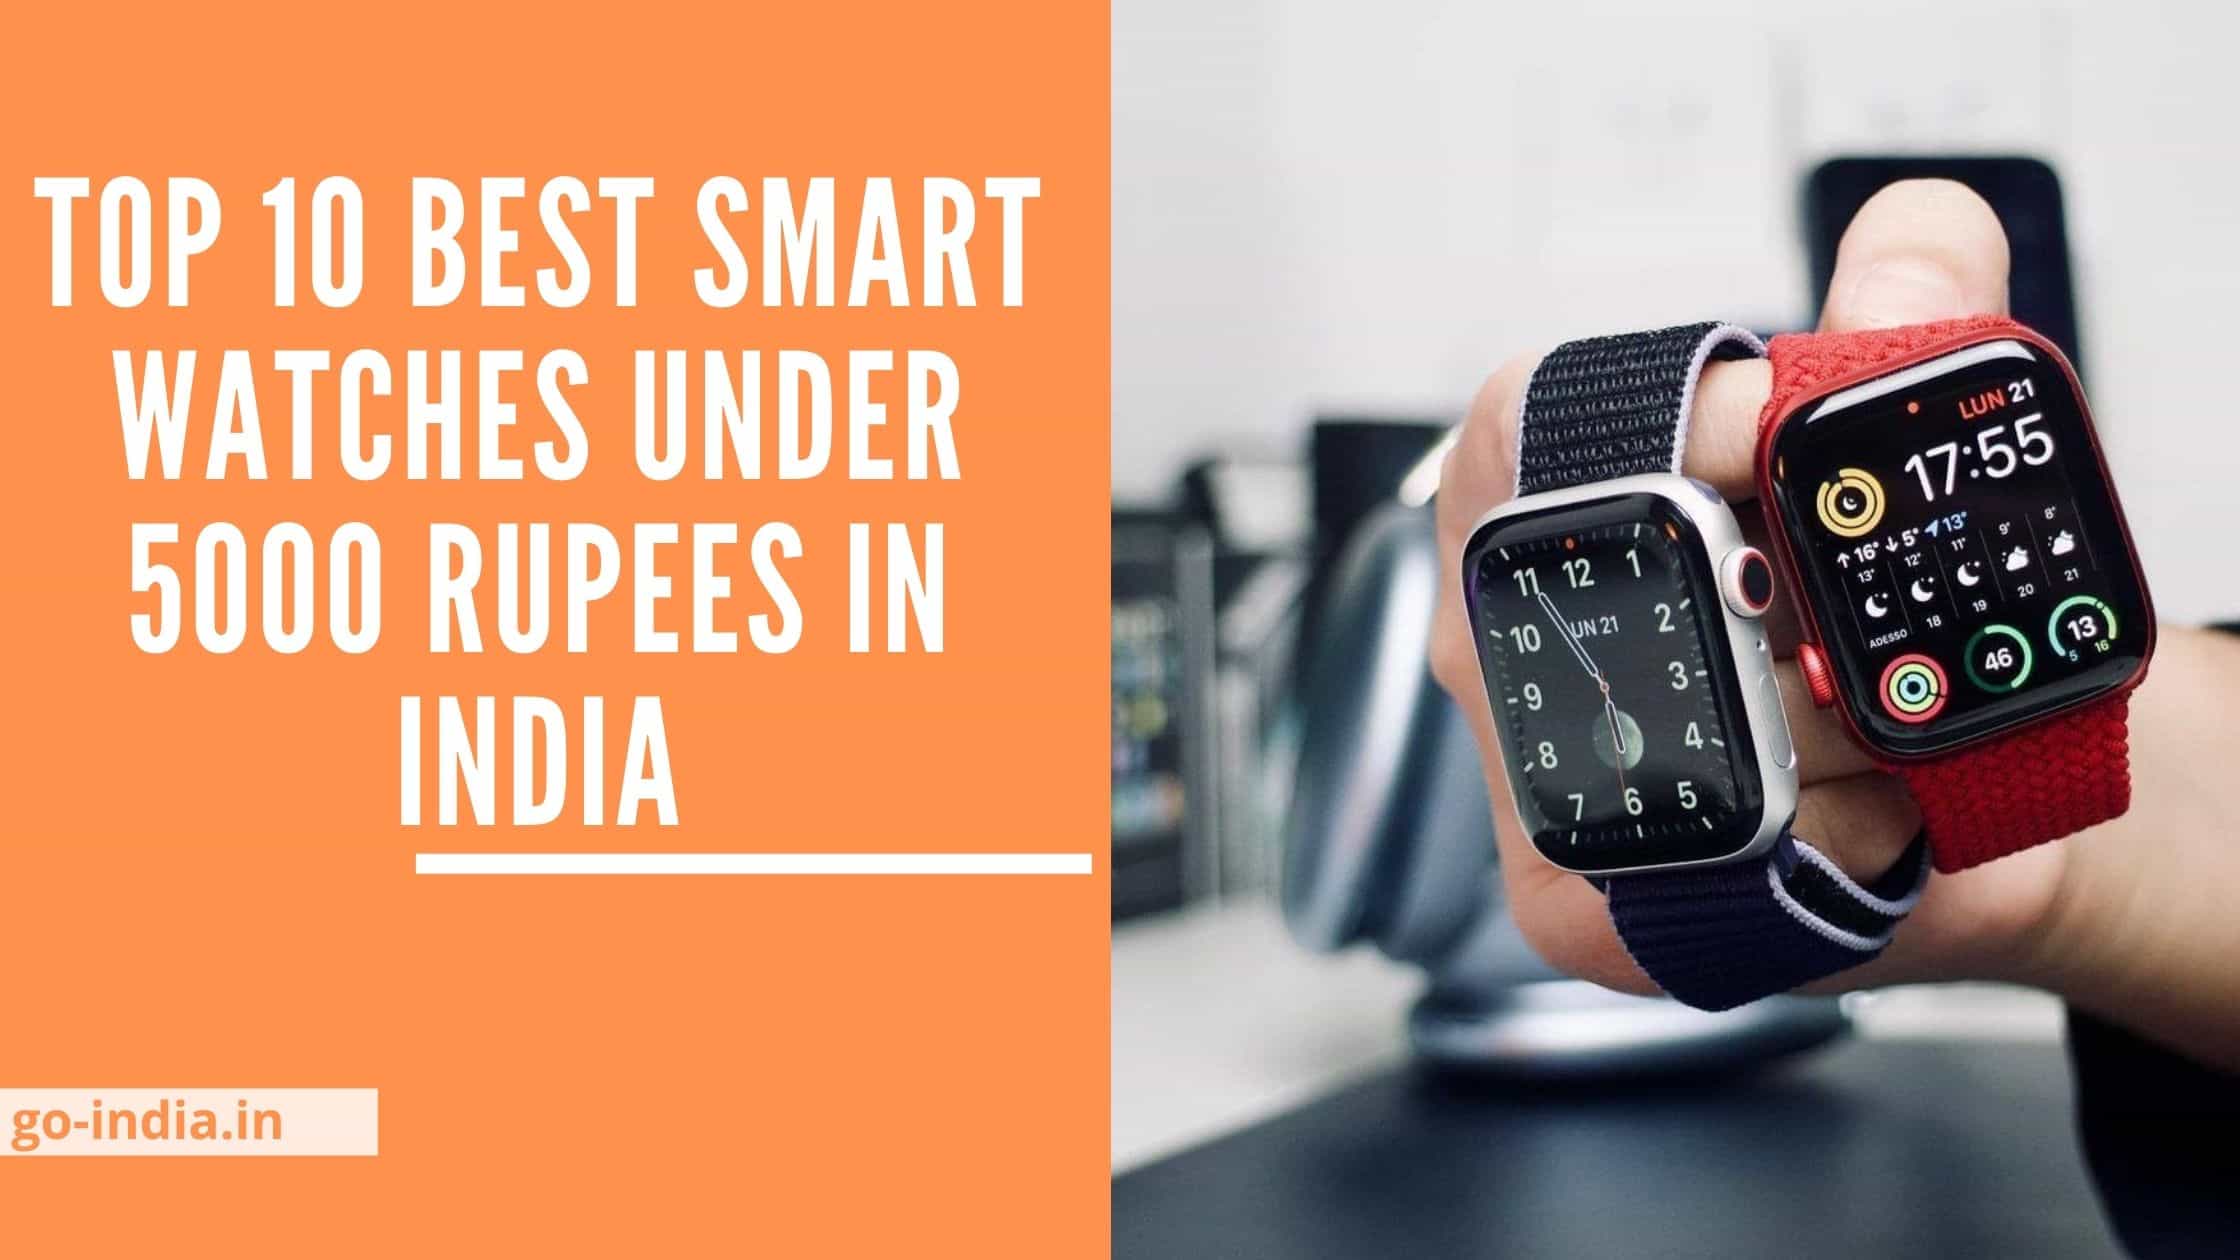 Top 10 Best Smart Watches Under 5000 Rupees in India